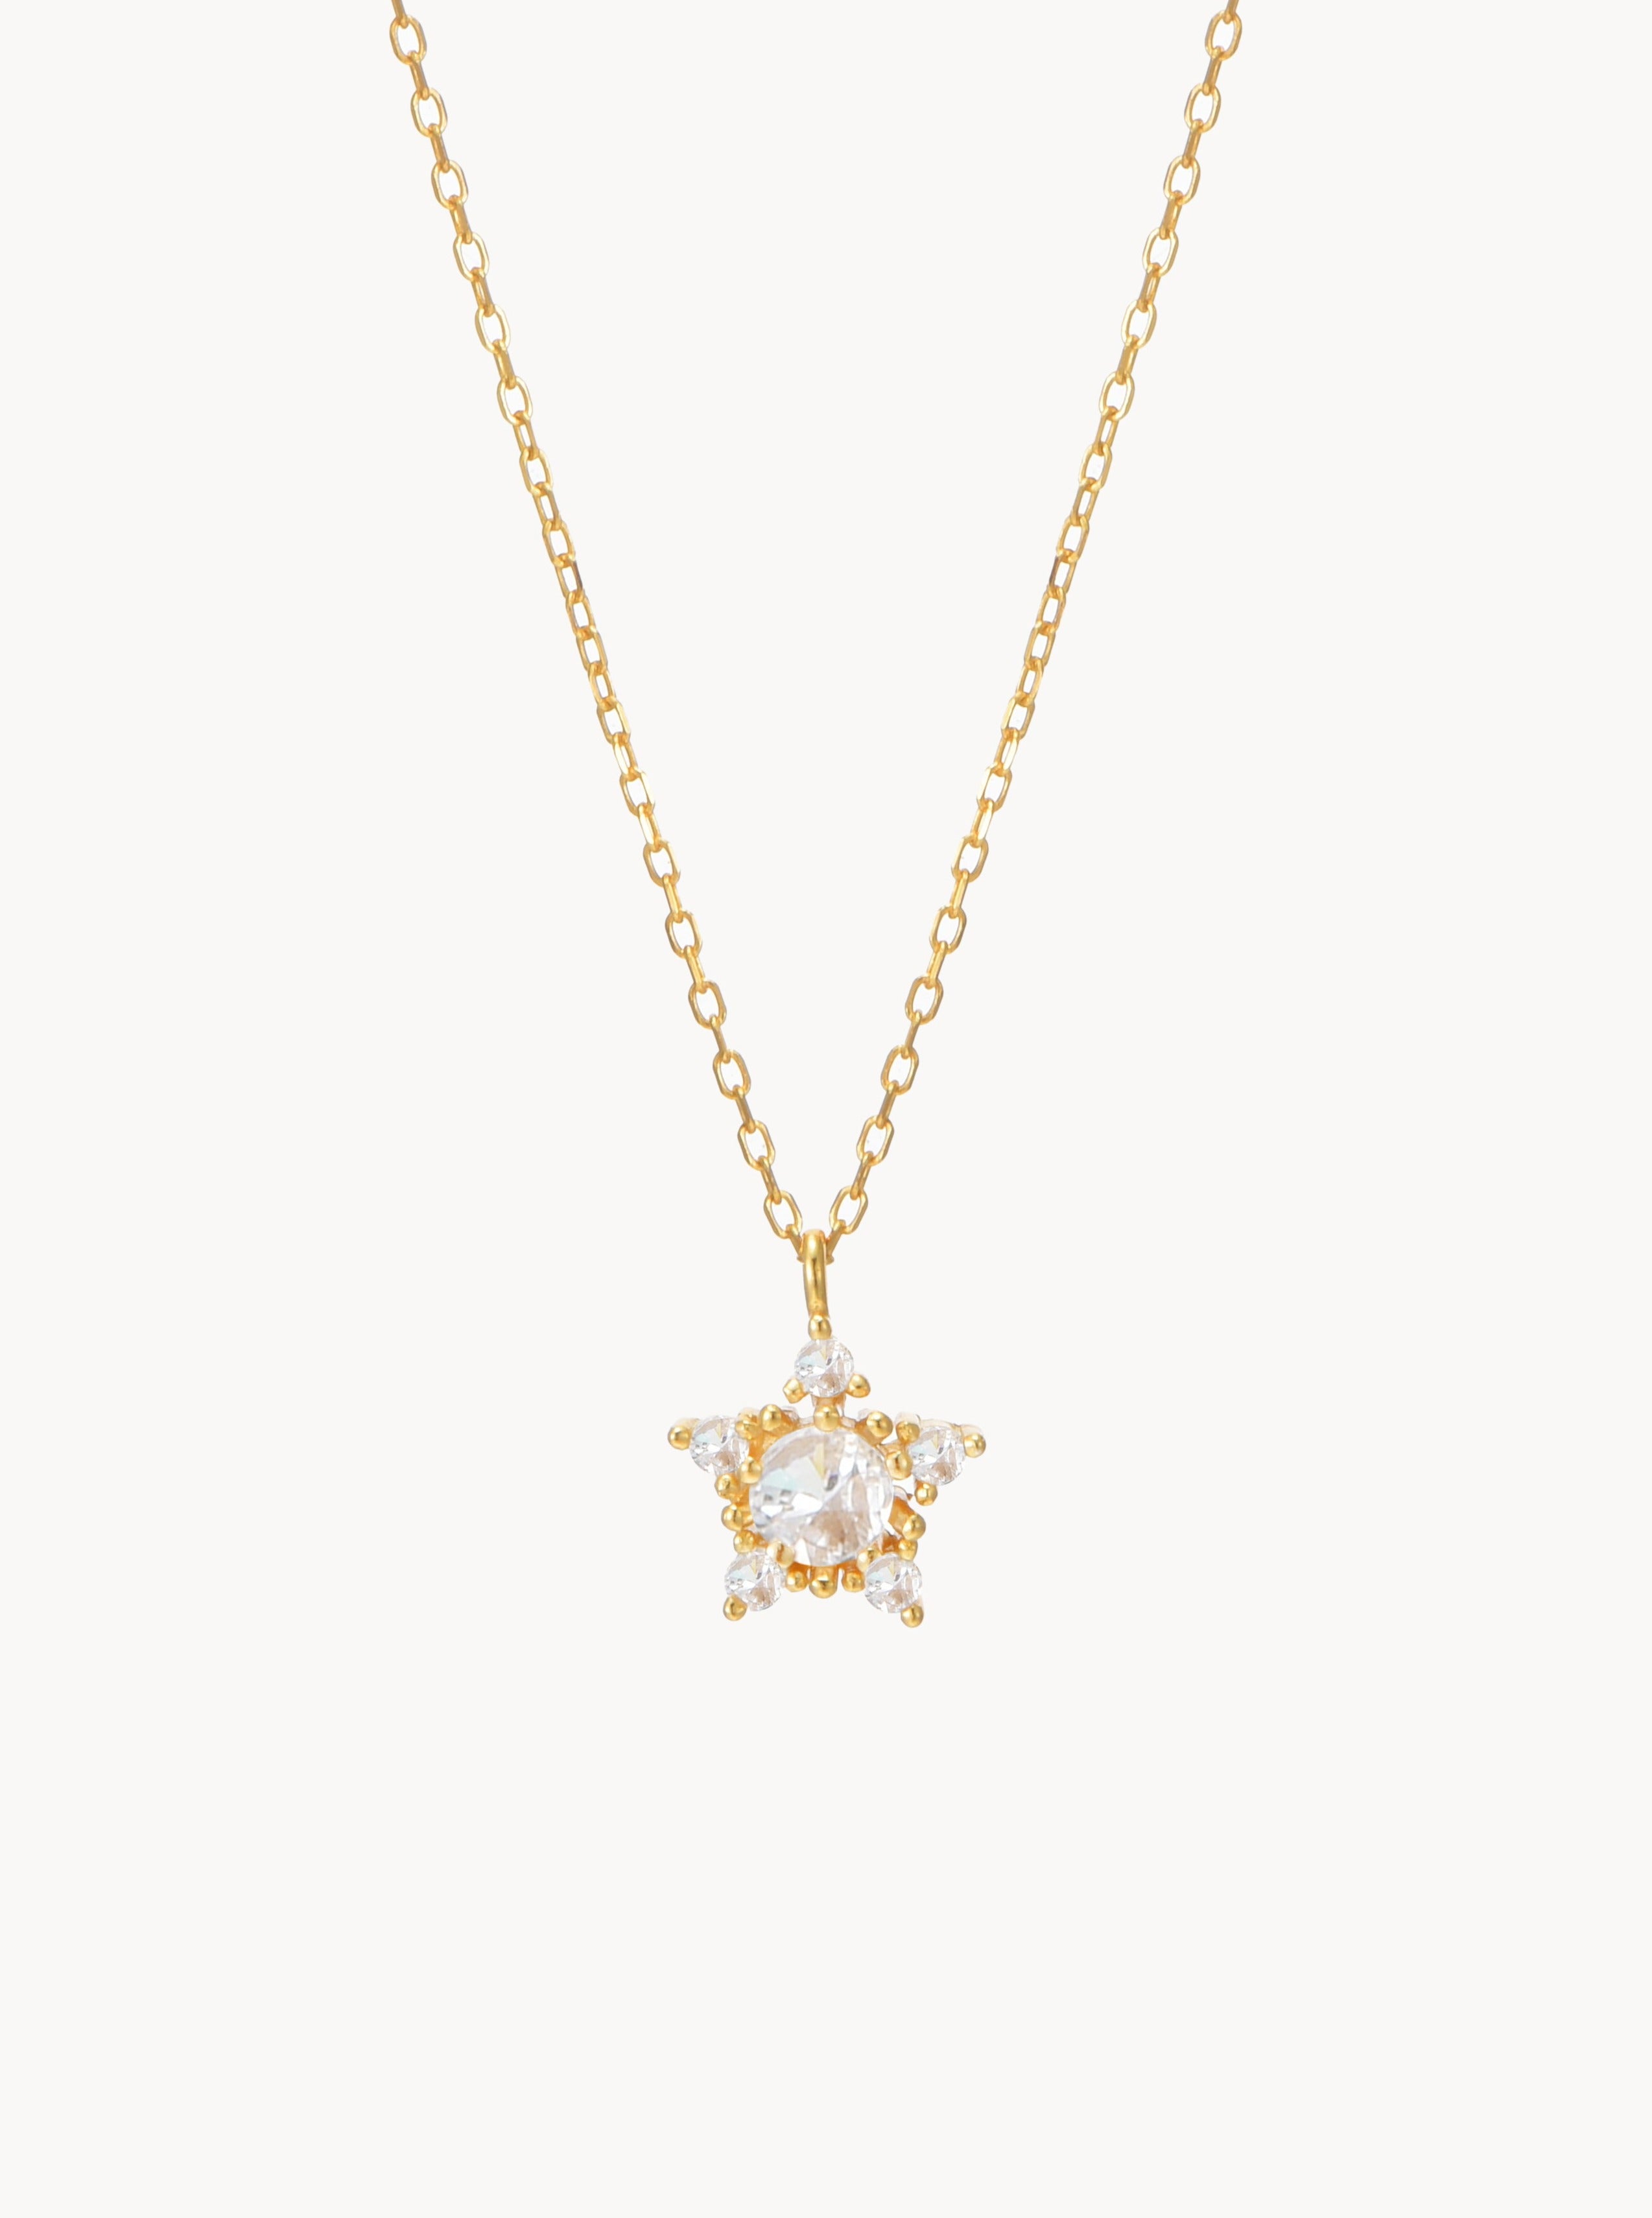 Lonely Star Necklace